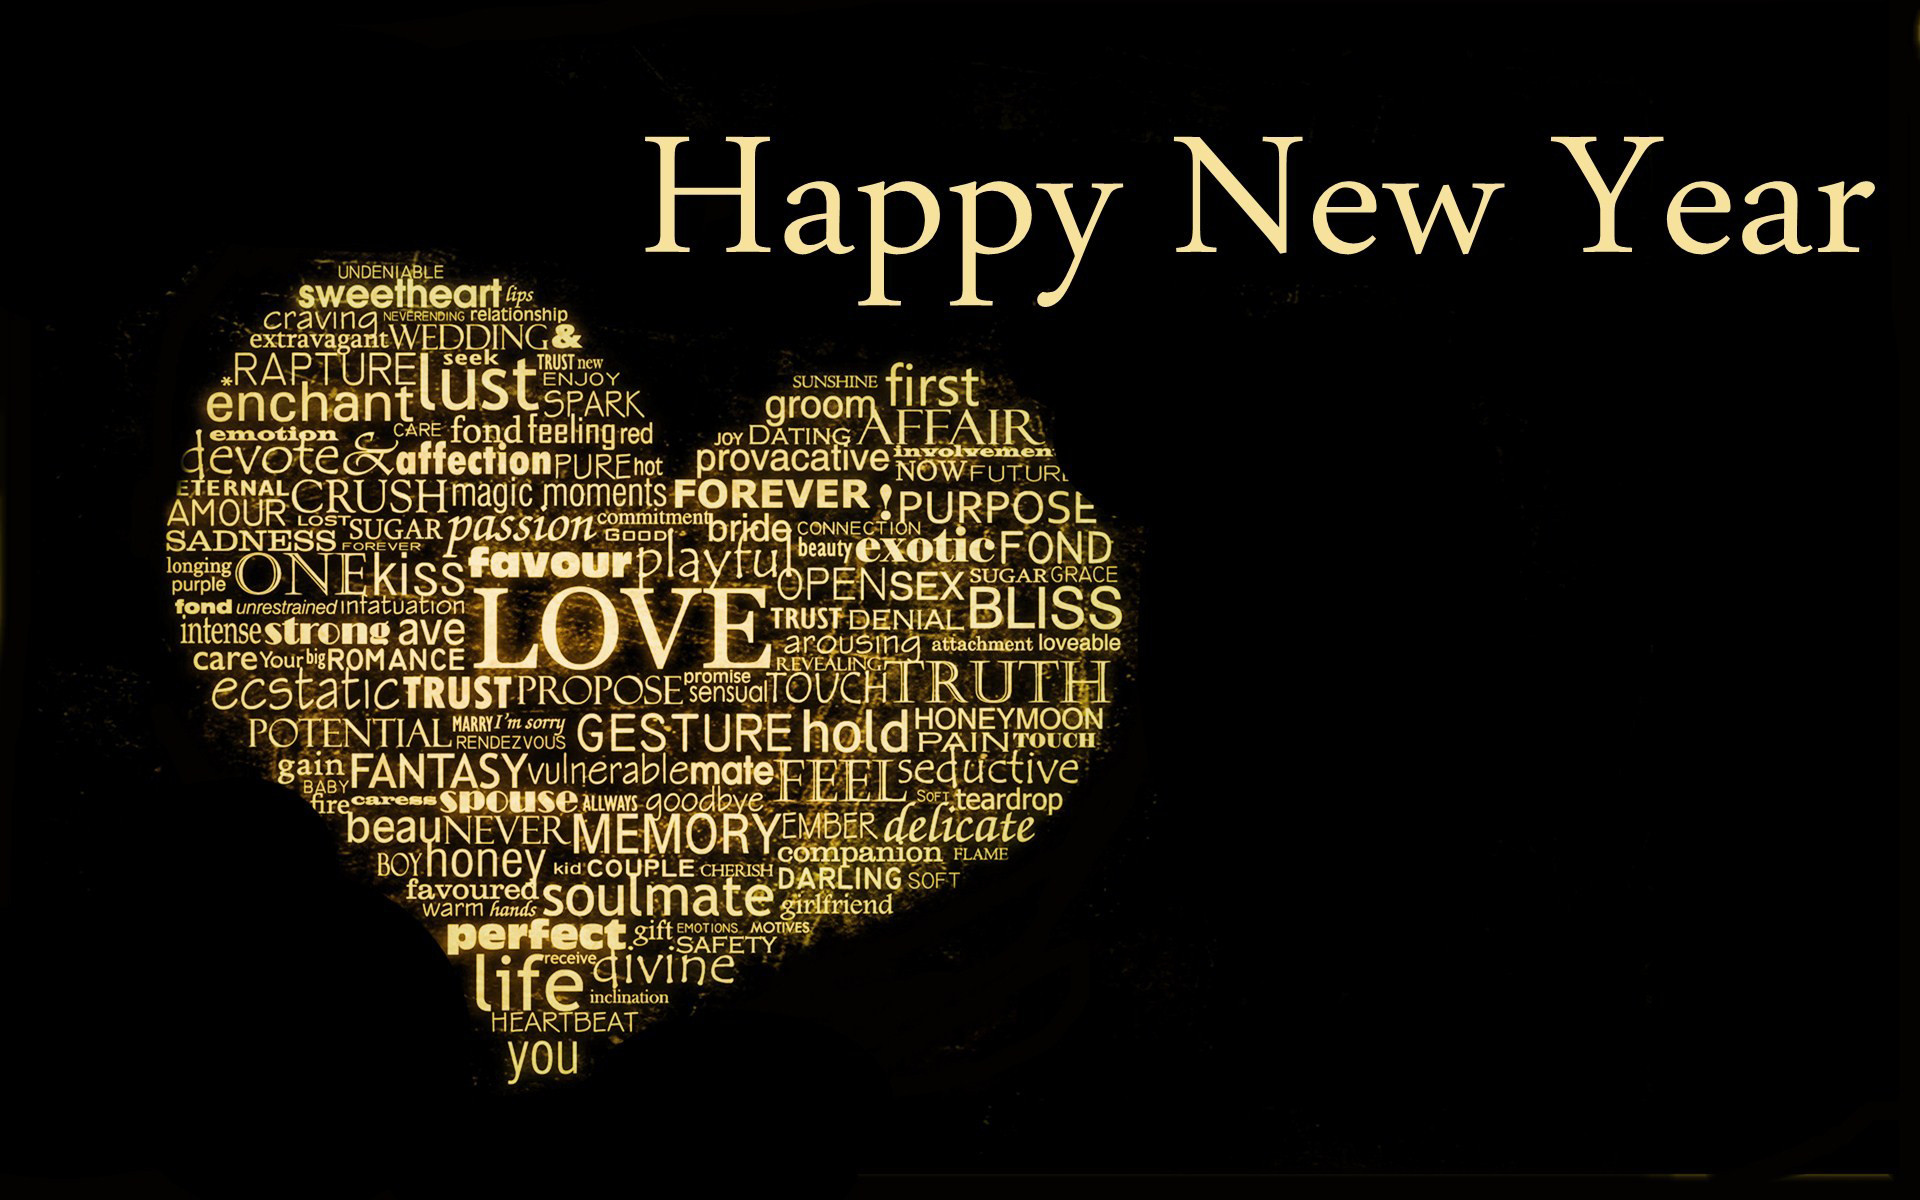 1920x1200 Happy New Year 2018 images for lovers Boyfriend and girlfriend.  Happy_New_Year_2018_images_for_lovers. Happy_New_Year_2018_images_for_lovers